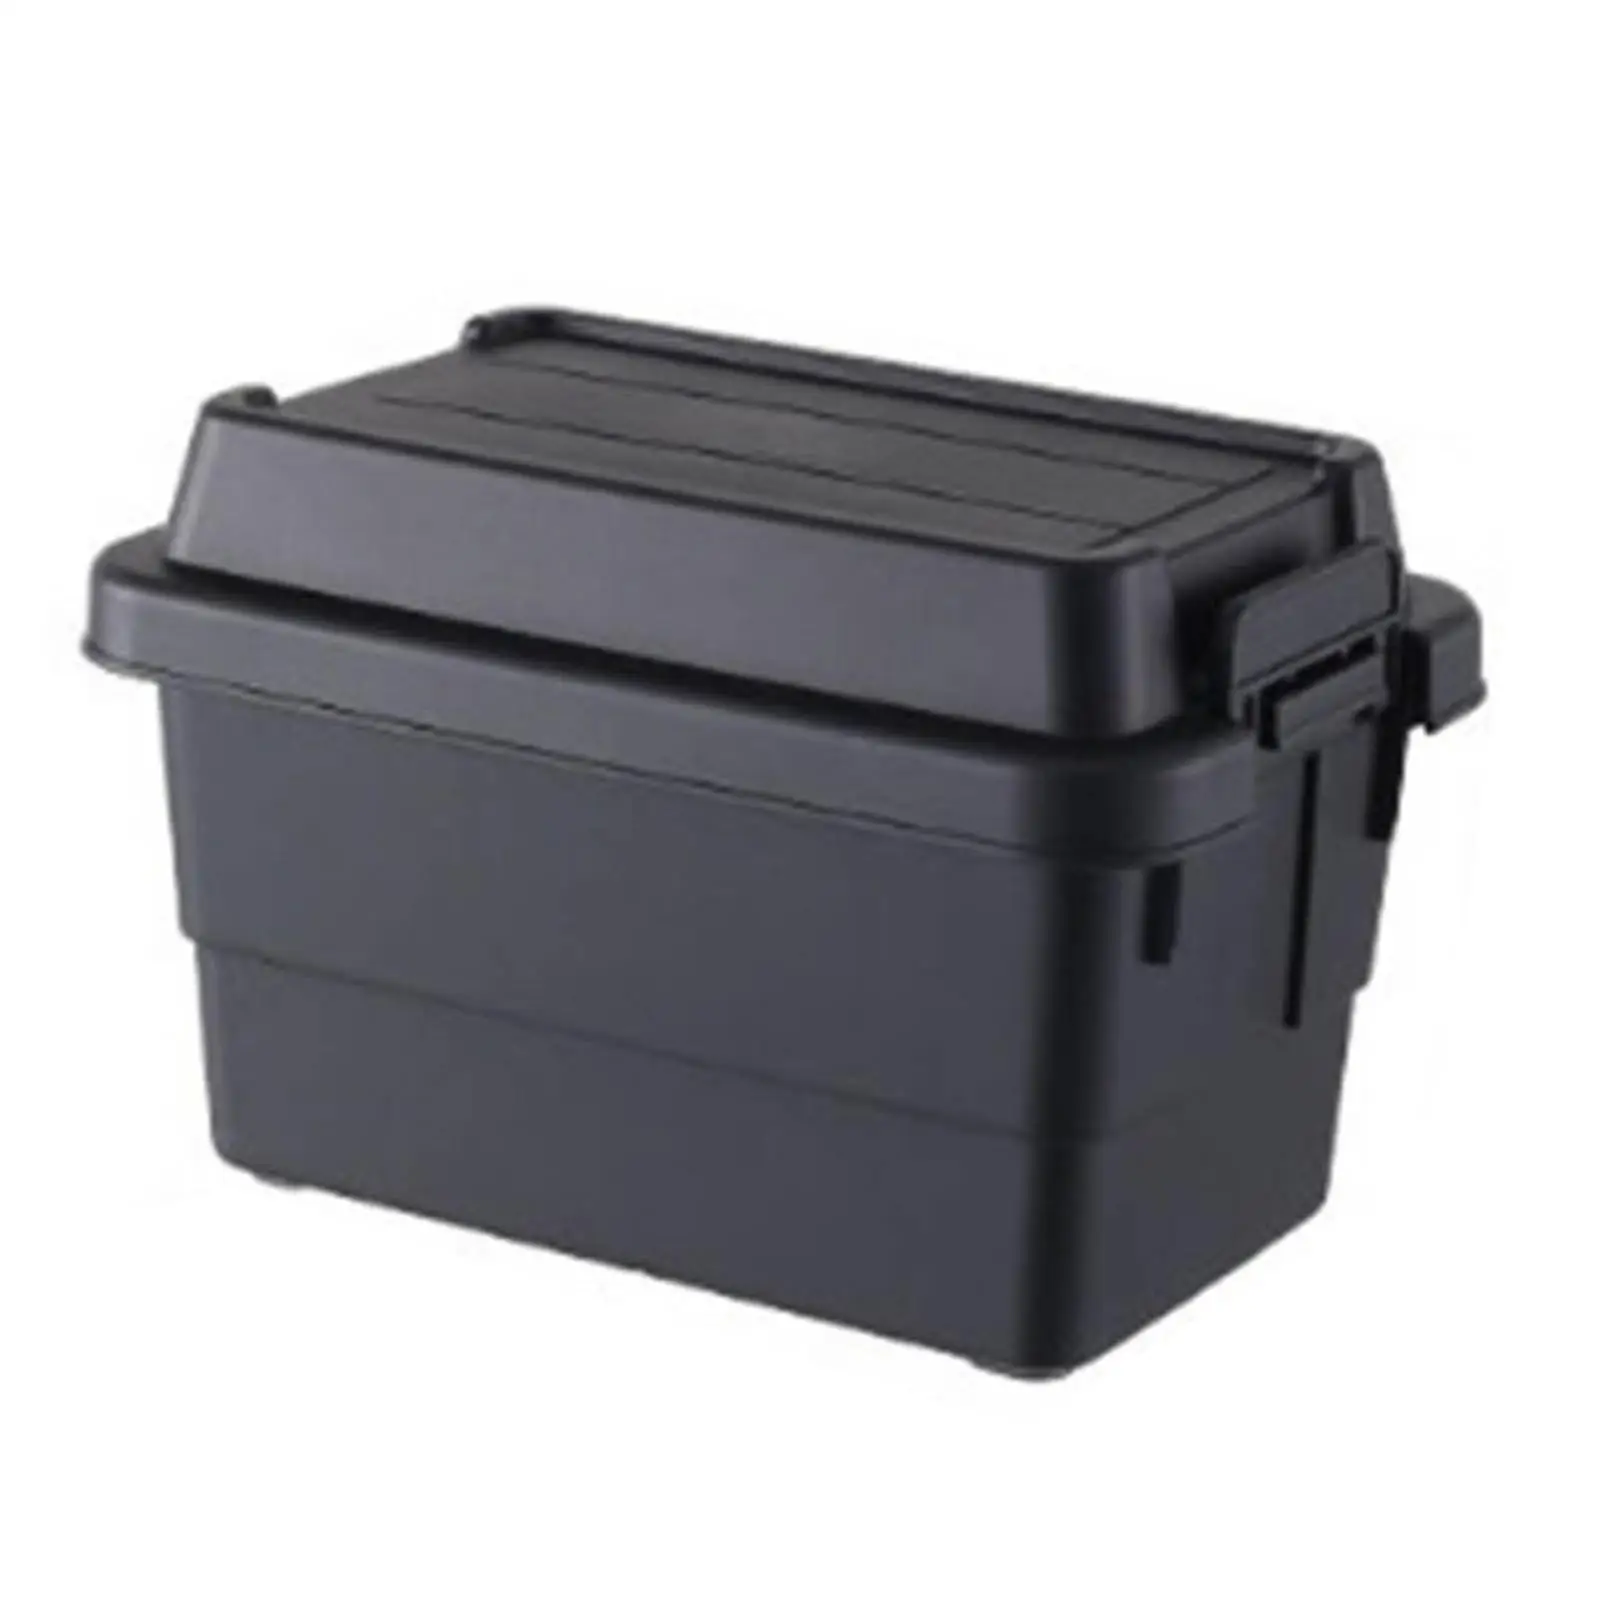 Camping Storage Box Multifunctional Portable Storage Trunk Lockable for Barbecue